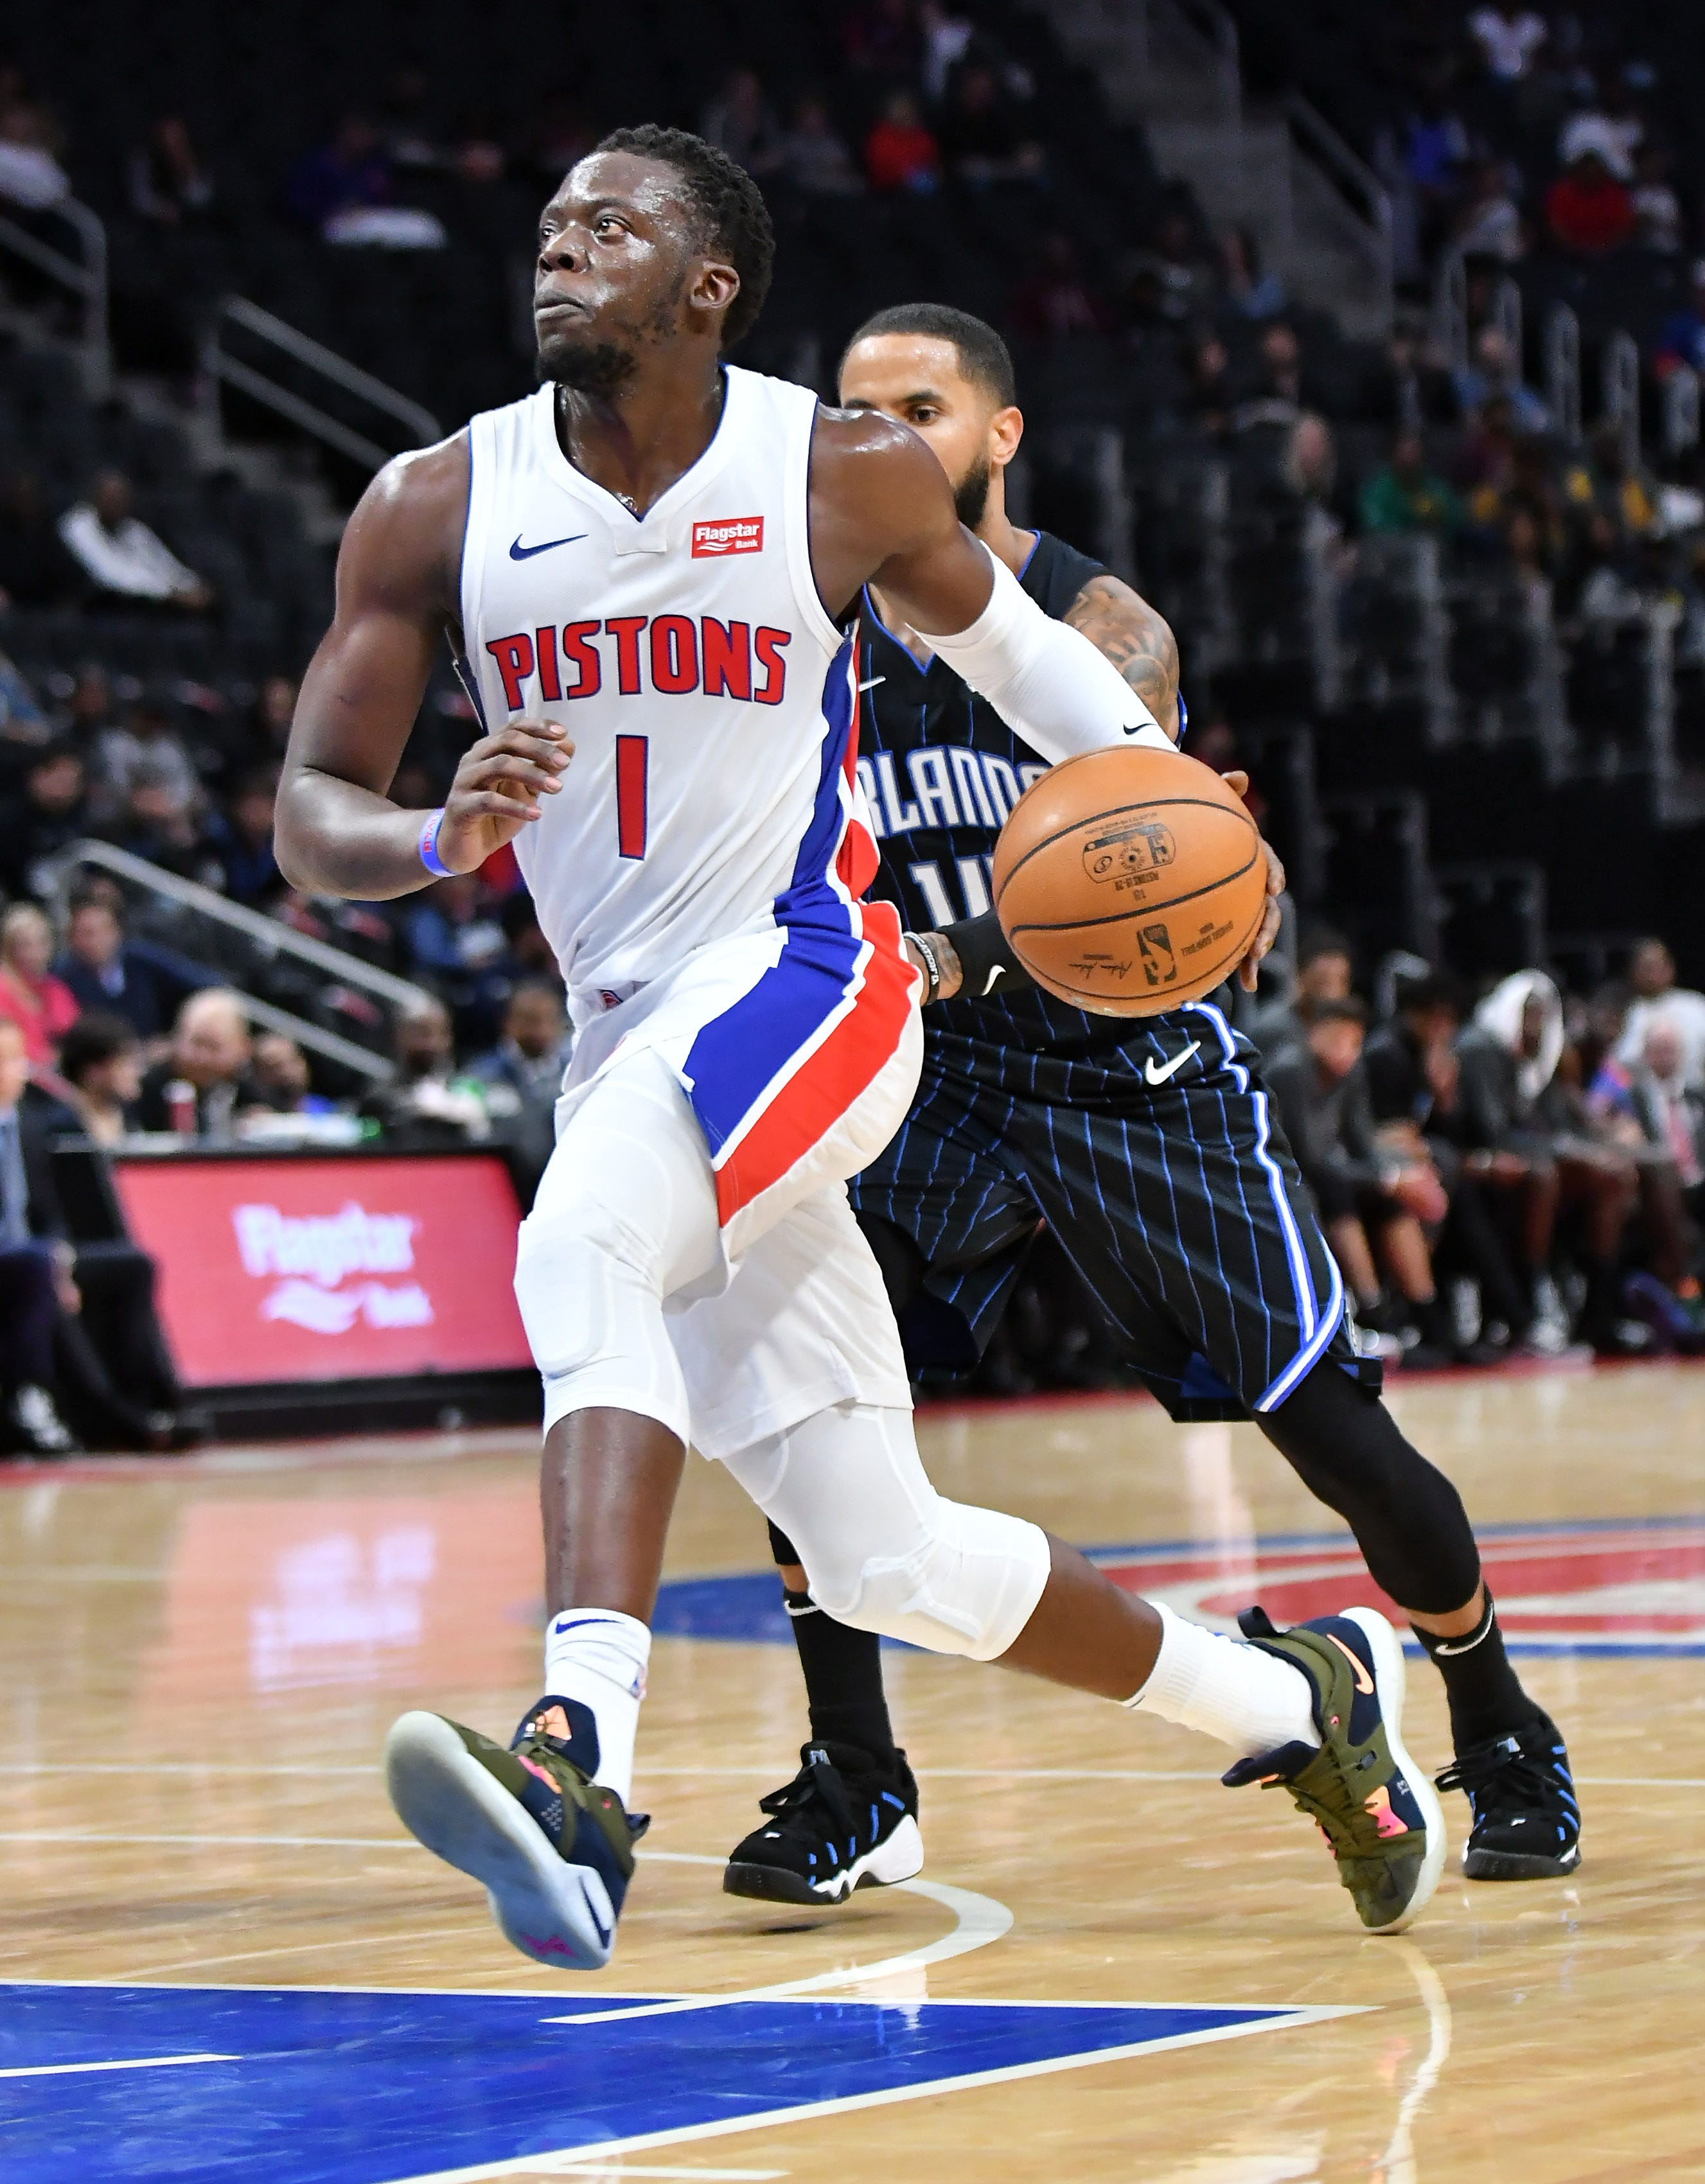 Reggie Jackson: Age: 29. Ht: 6-3. Wt: 208. 2018-19 stats: 15.4 pts, 4.2 assts, 37% 3FG. Outlook: After a healthy season in which he played all 82 games, Jackson has a different role, playing more off the ball as a spot-up shooter. From January on, he had a very solid season. He still has some pick-and-roll effectiveness but in small spurts than previous years.